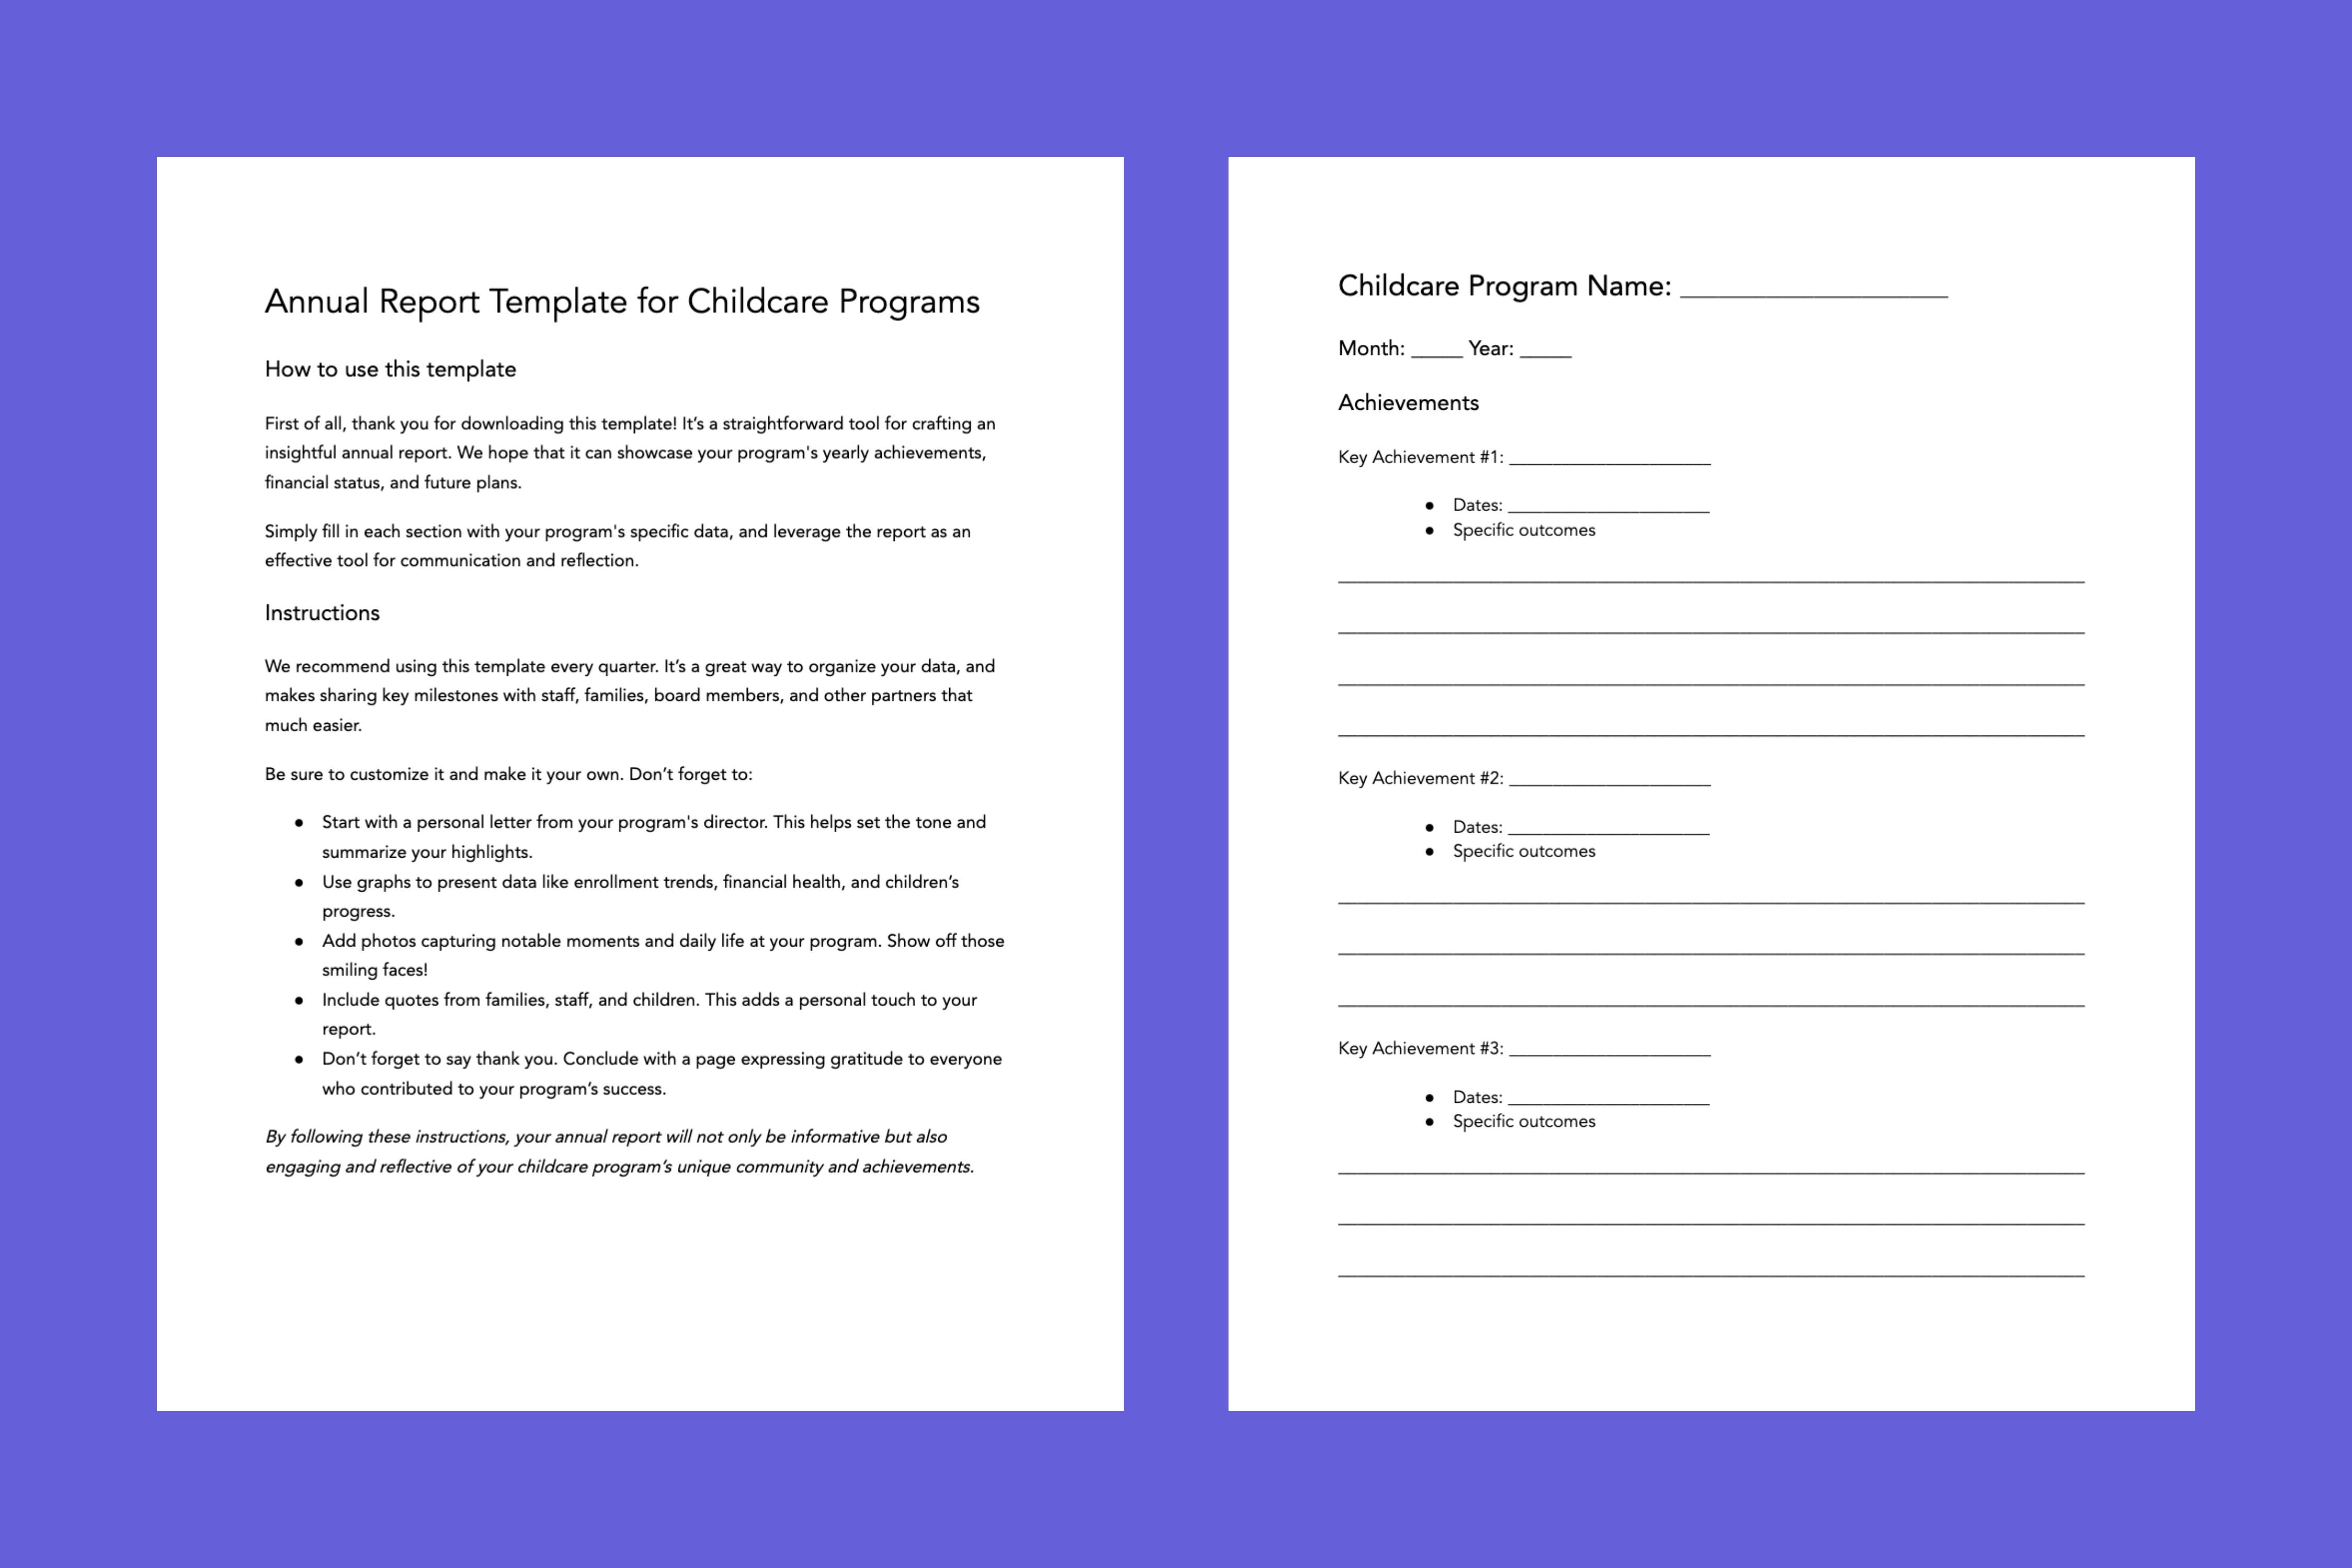 Annual Report for Childcare Programs